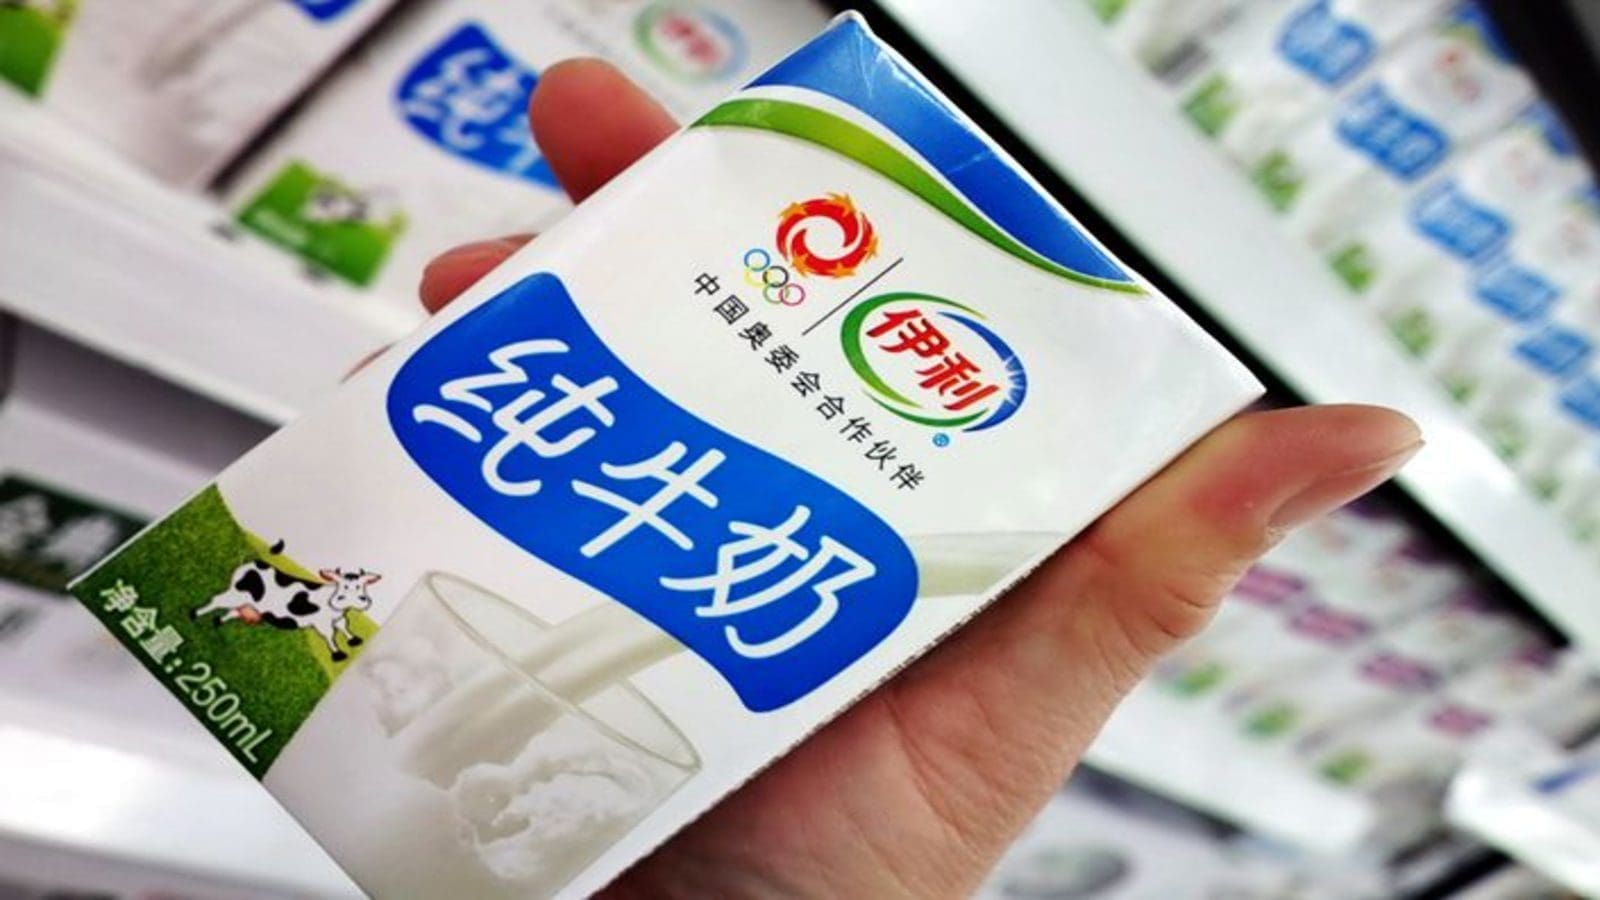 Yili beats expectations to register 30% growth in 9-month profits, commits to protect biodiversity in China